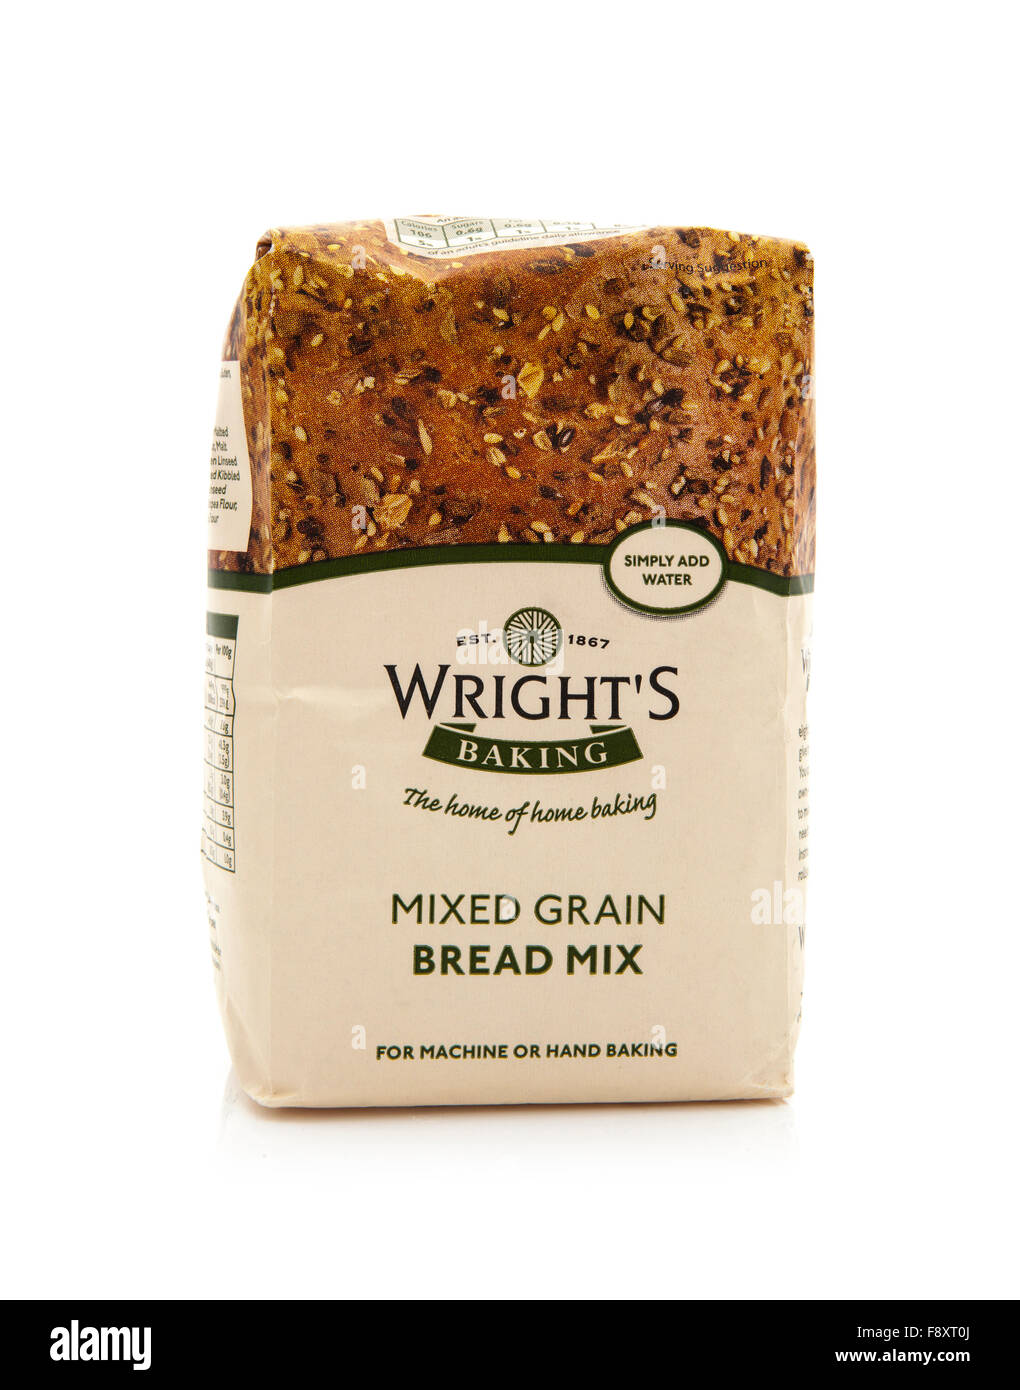 Bag of Wrights Mixed Grain Bread Mix on a white background Stock Photo